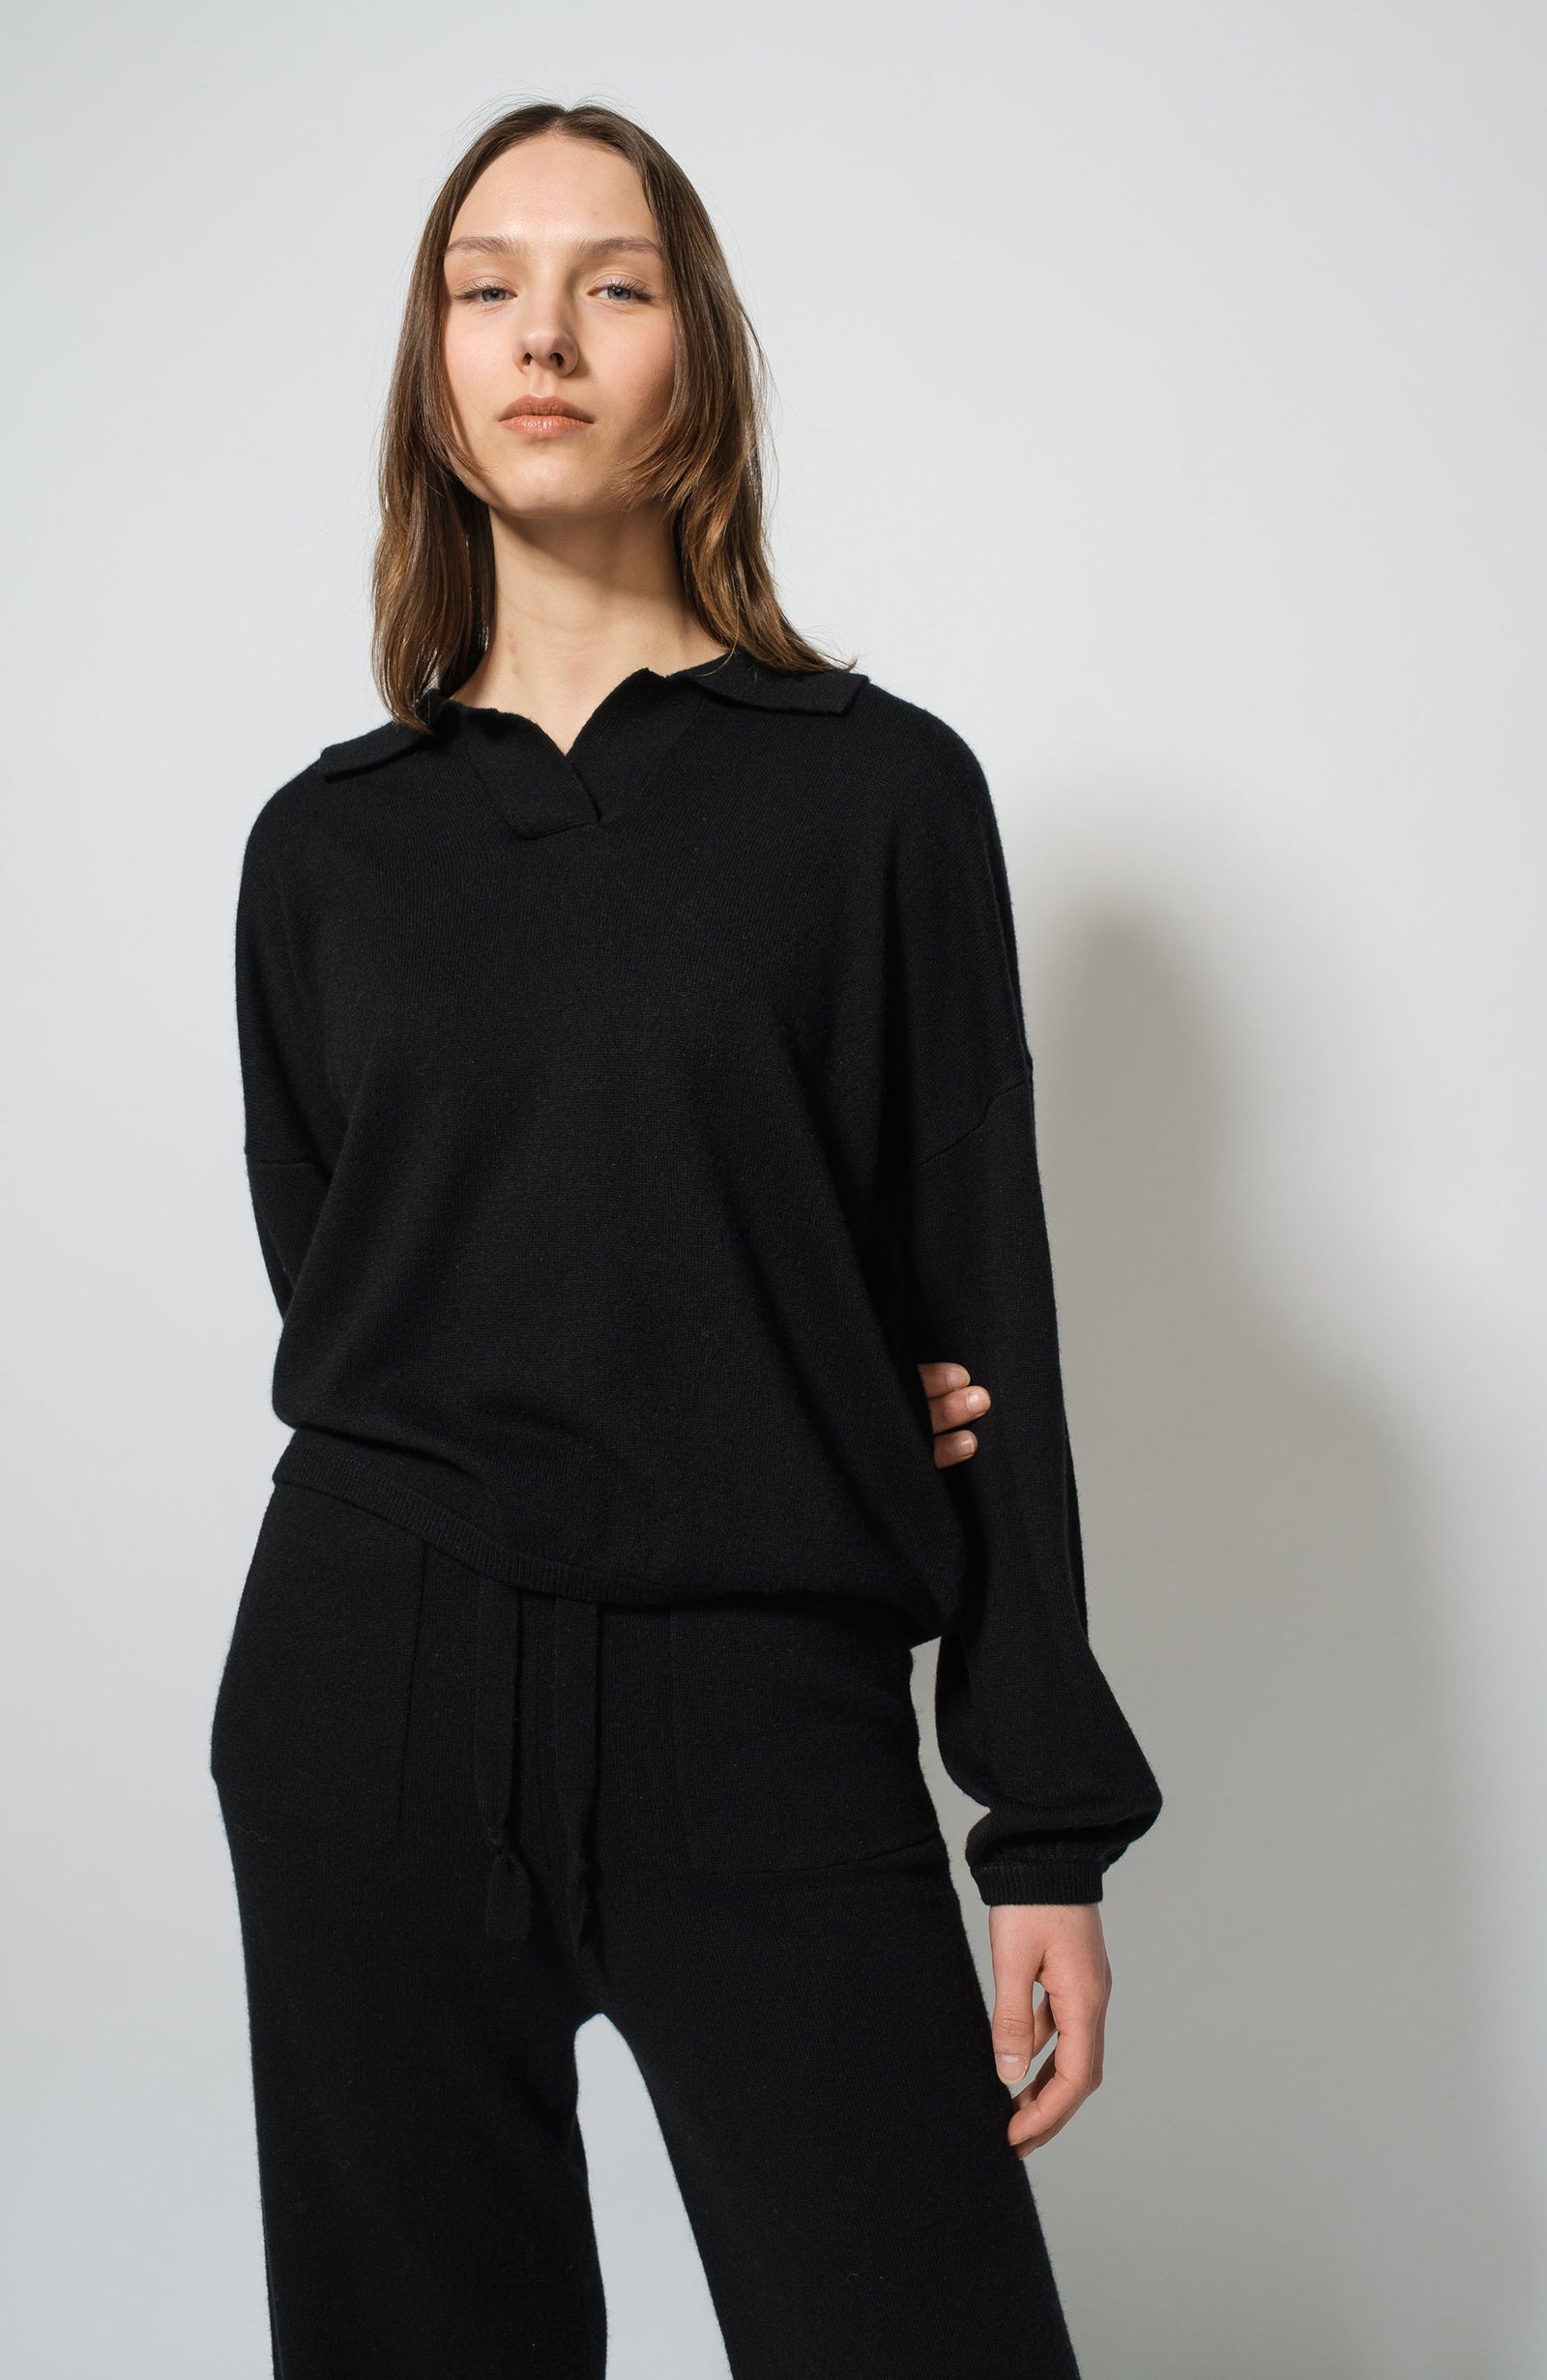 Black poloneck Cashmere Sweater FTC CASHMERE - Take Online